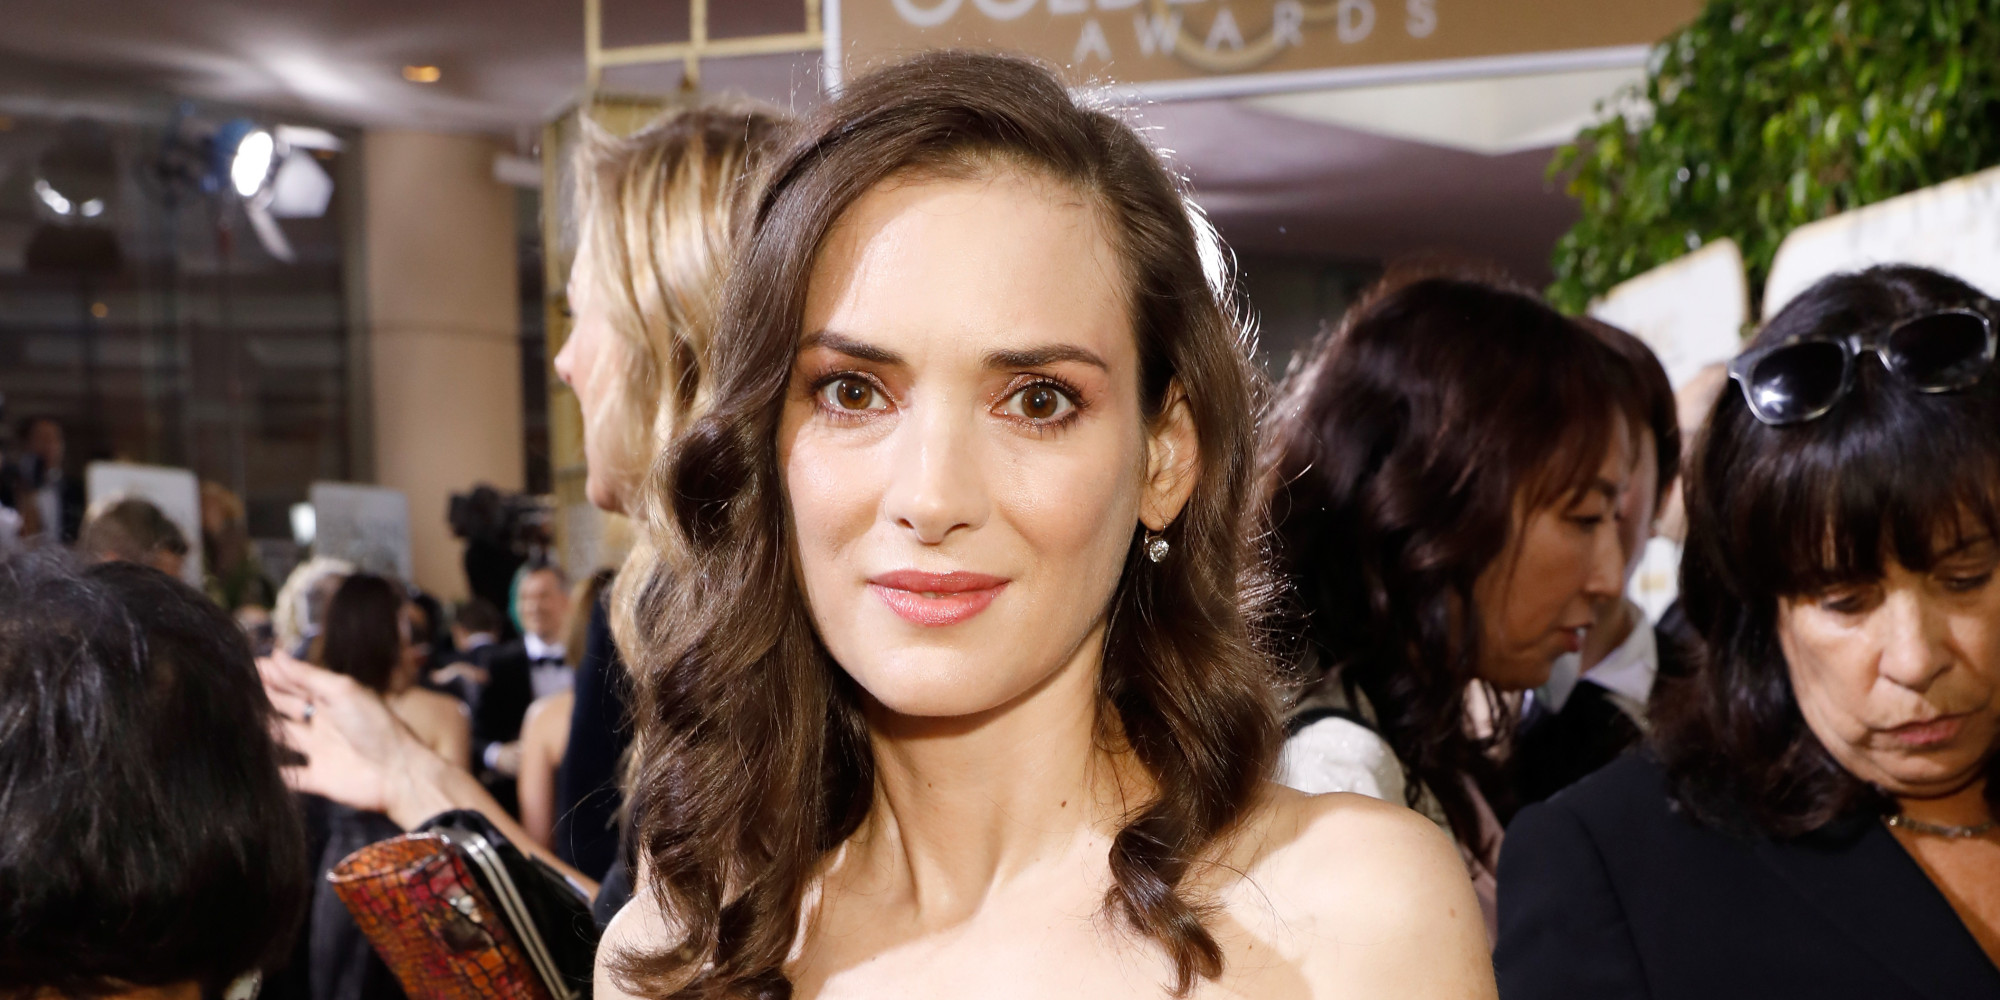 Winona Ryder At The 2017 Golden Globes Looks Like Winona At The 1991 Globes - Huffington Post Canada